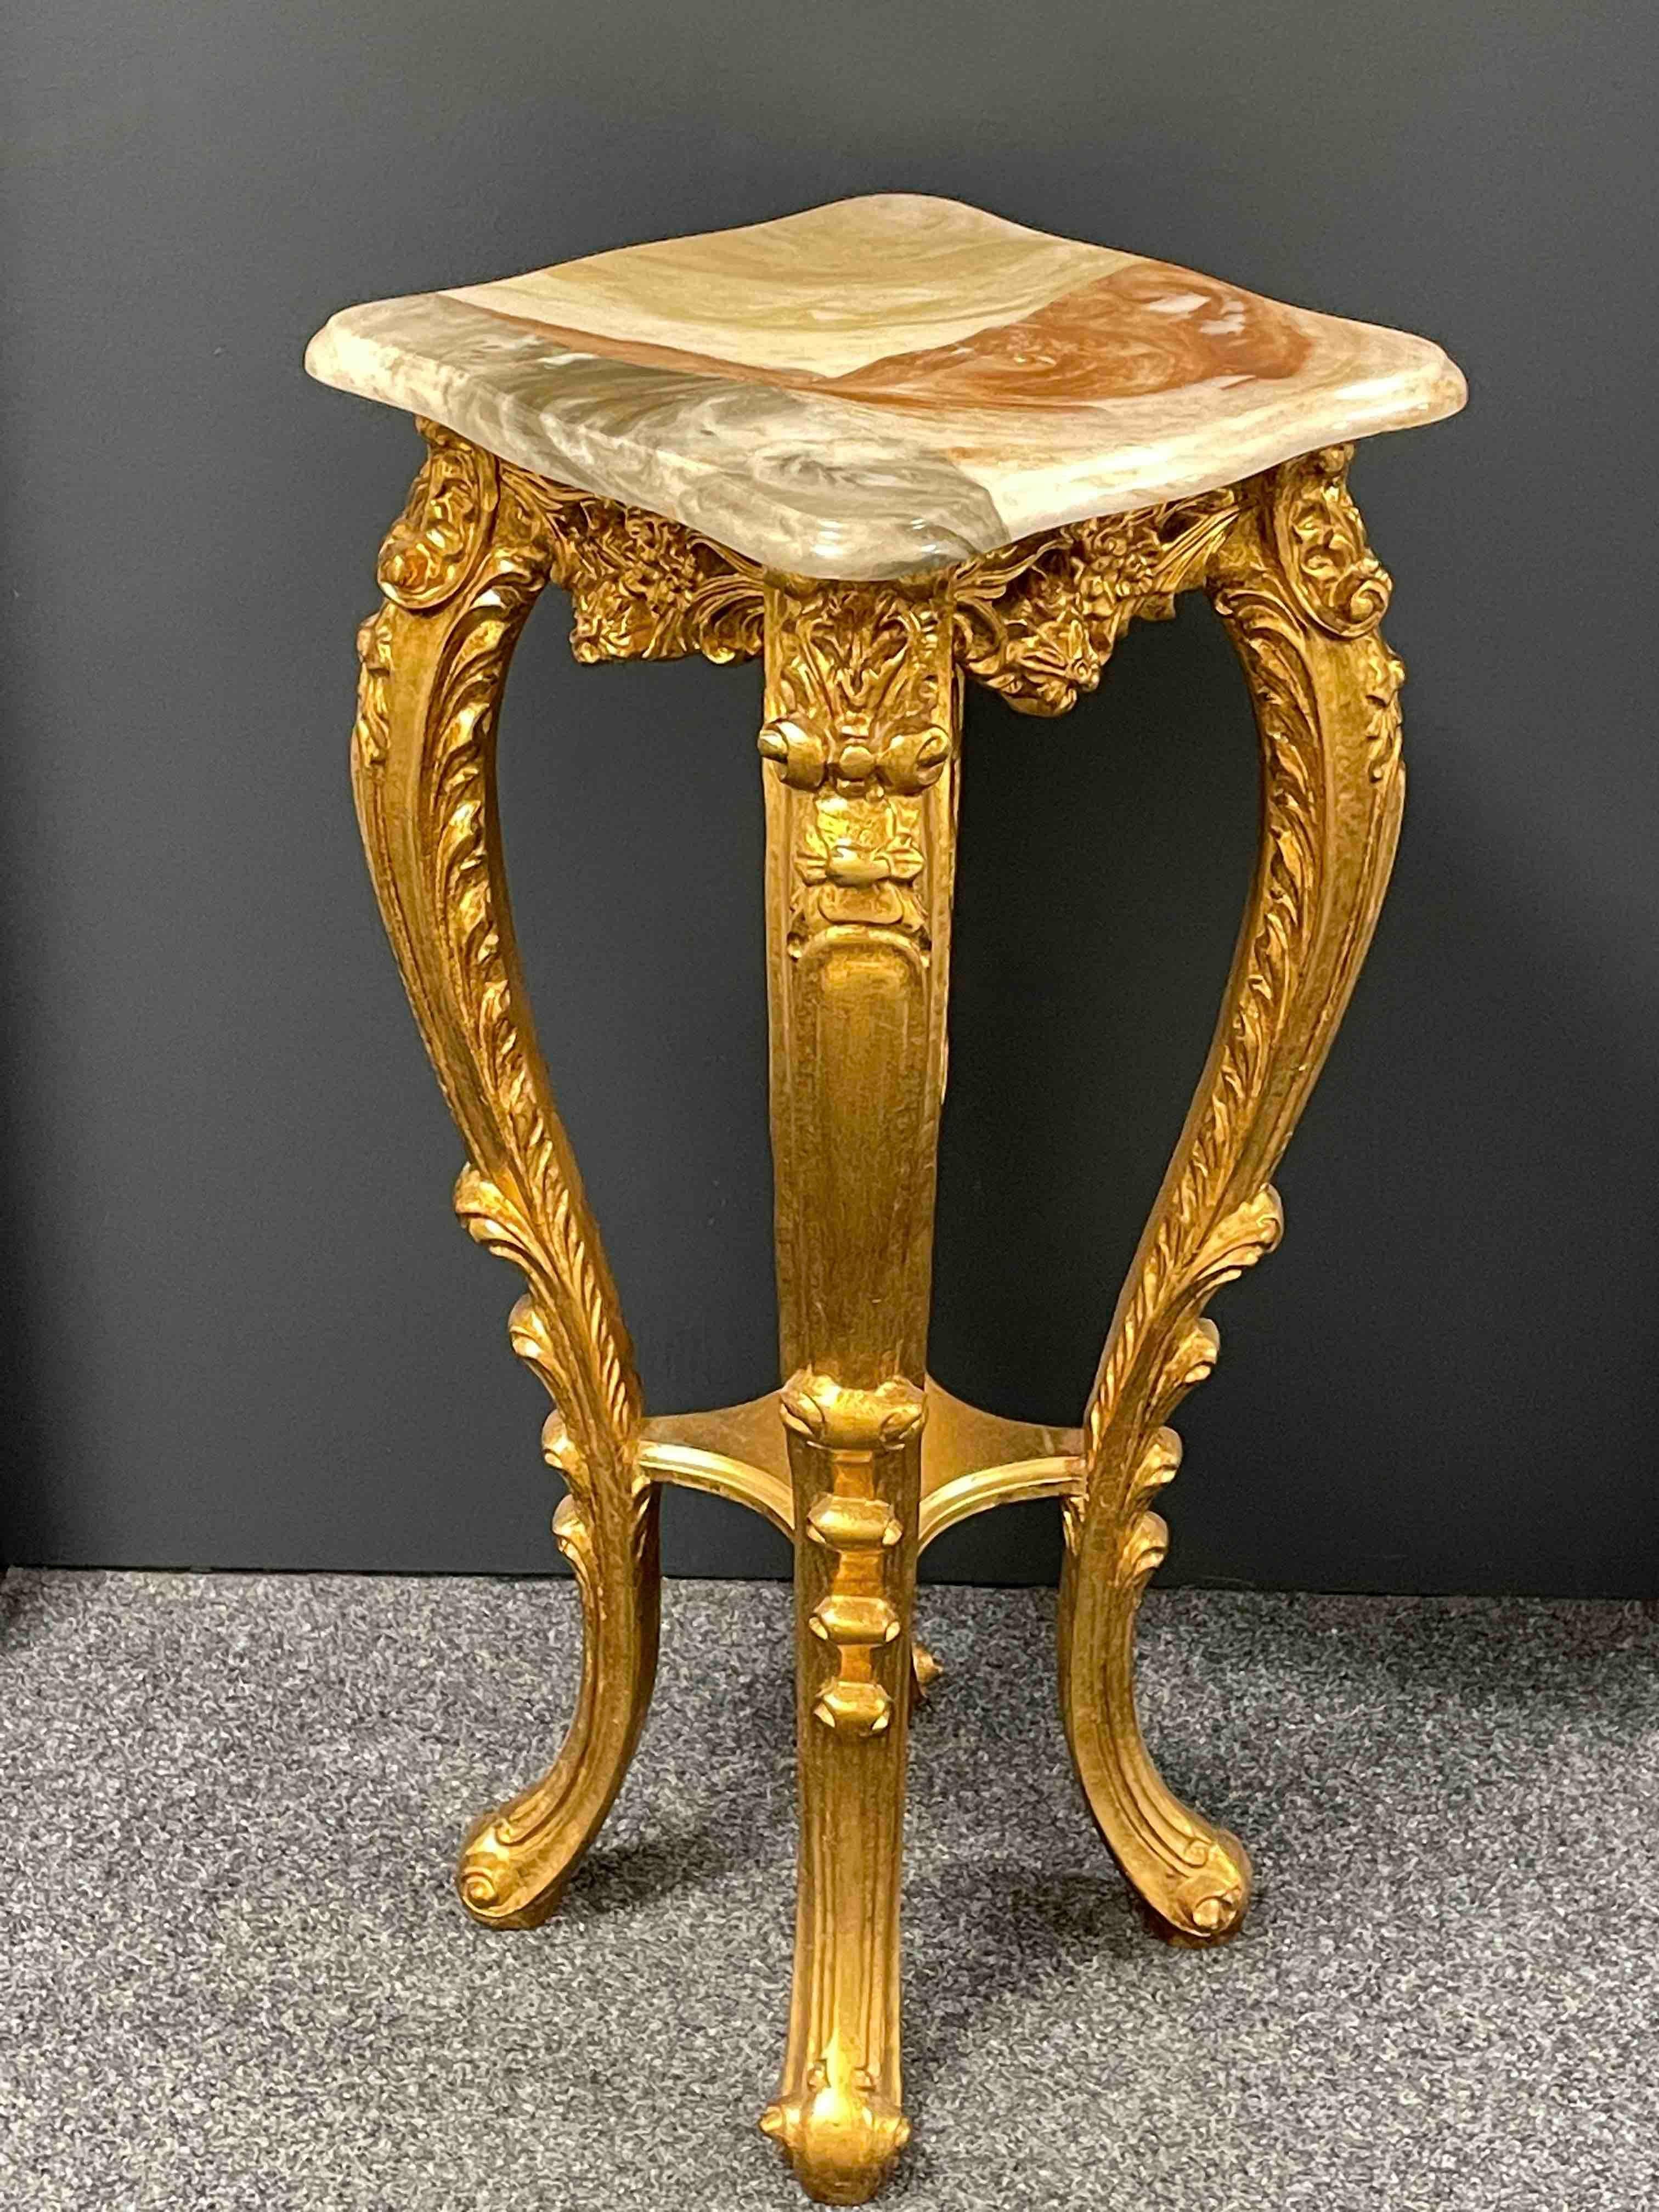 20th Century Carved Gilt Wood Toleware Console Pedestal Table, Italy For Sale 1